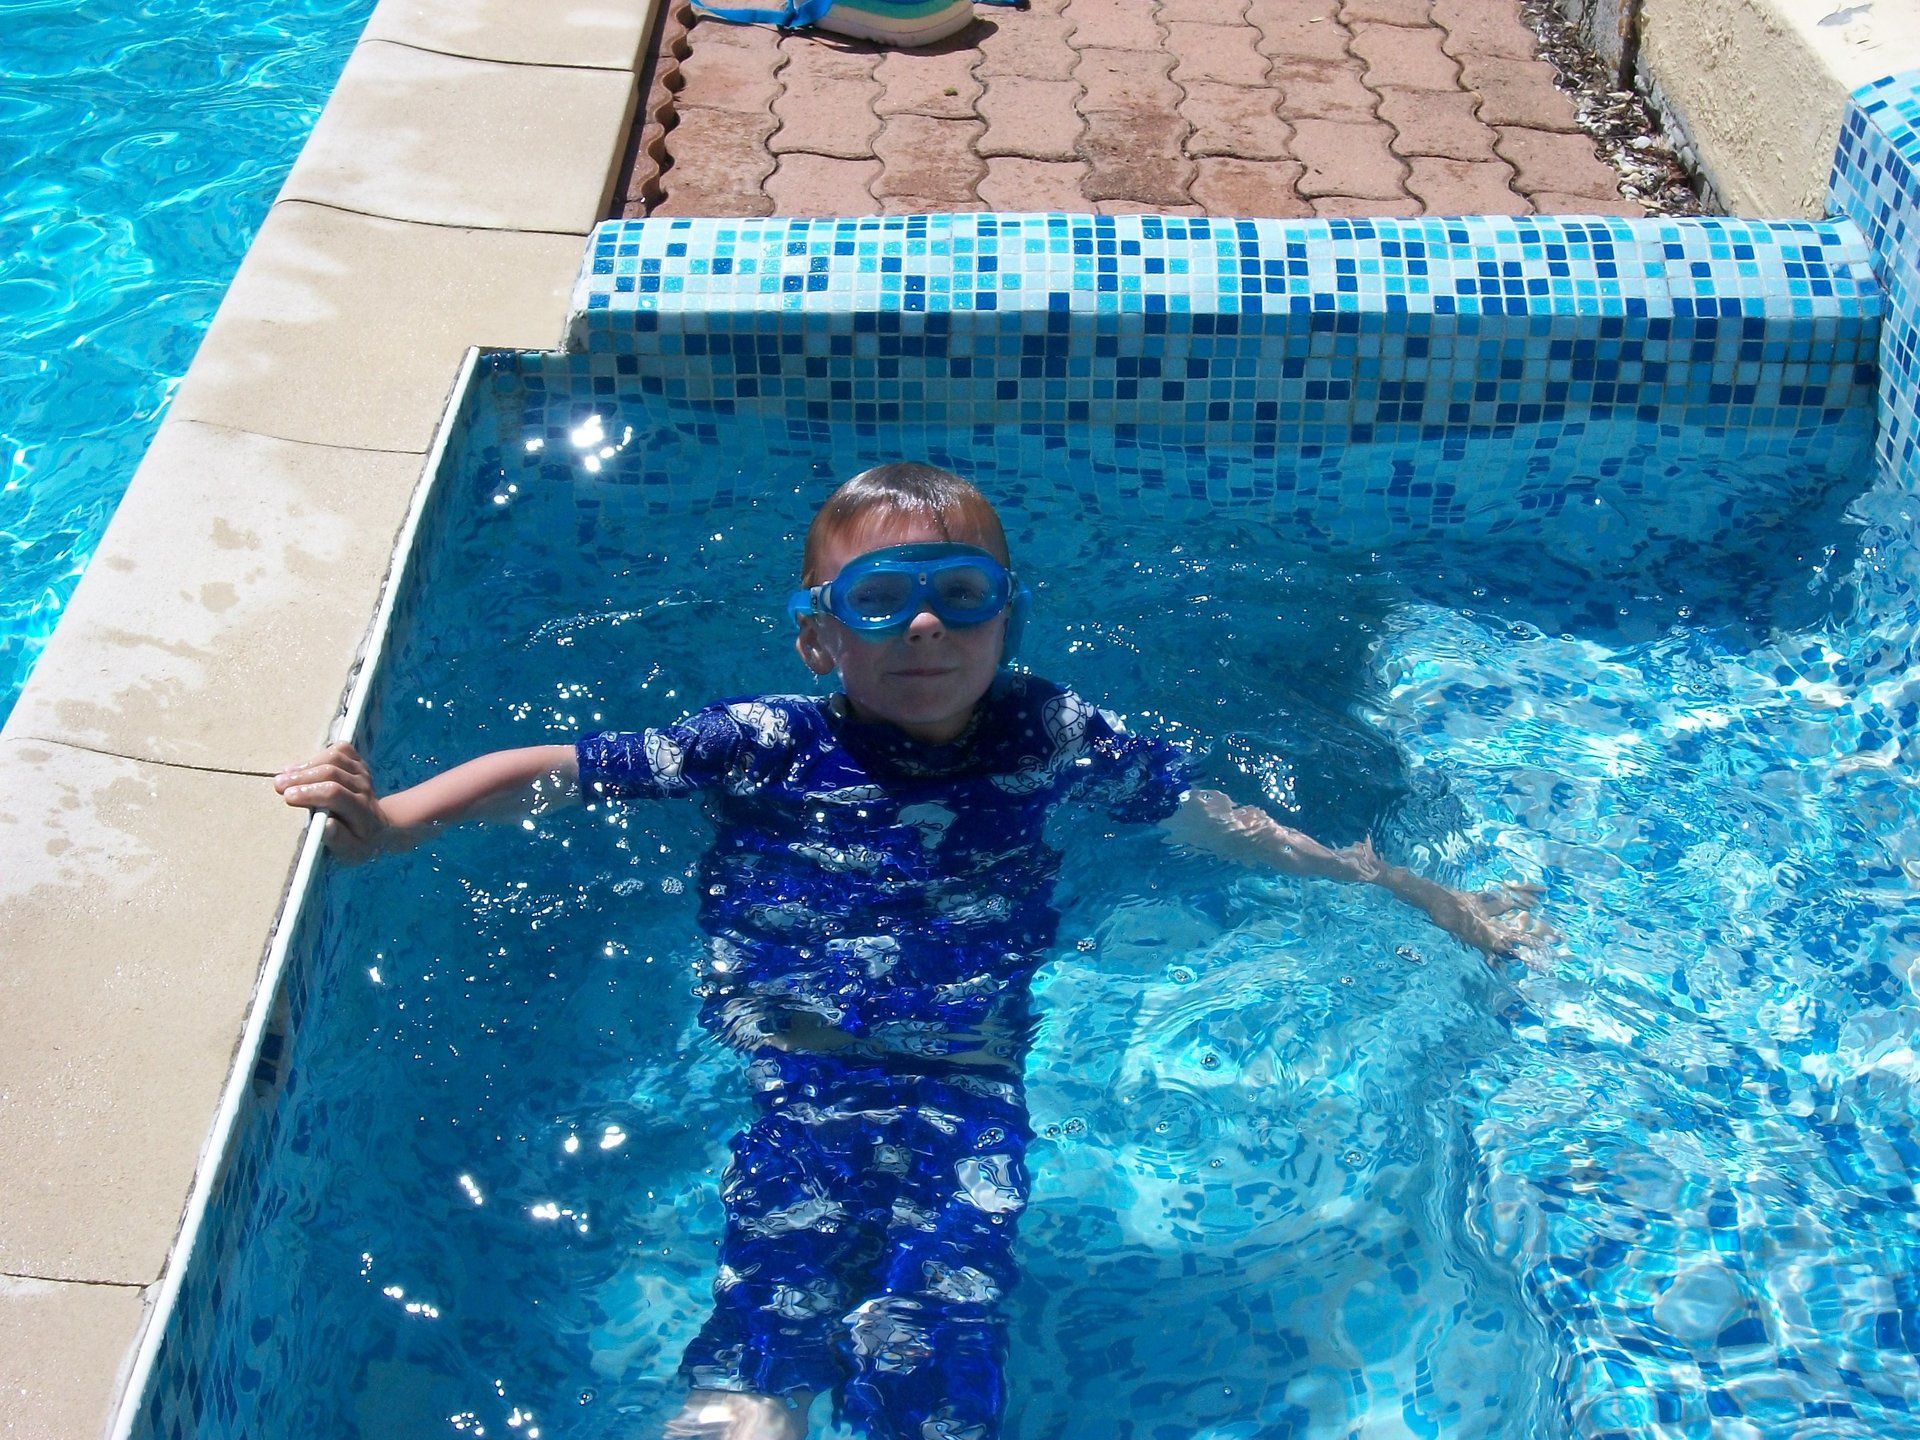 young boy wearing blue swim goggles and blue sun suit relaxing in a small tiled pool